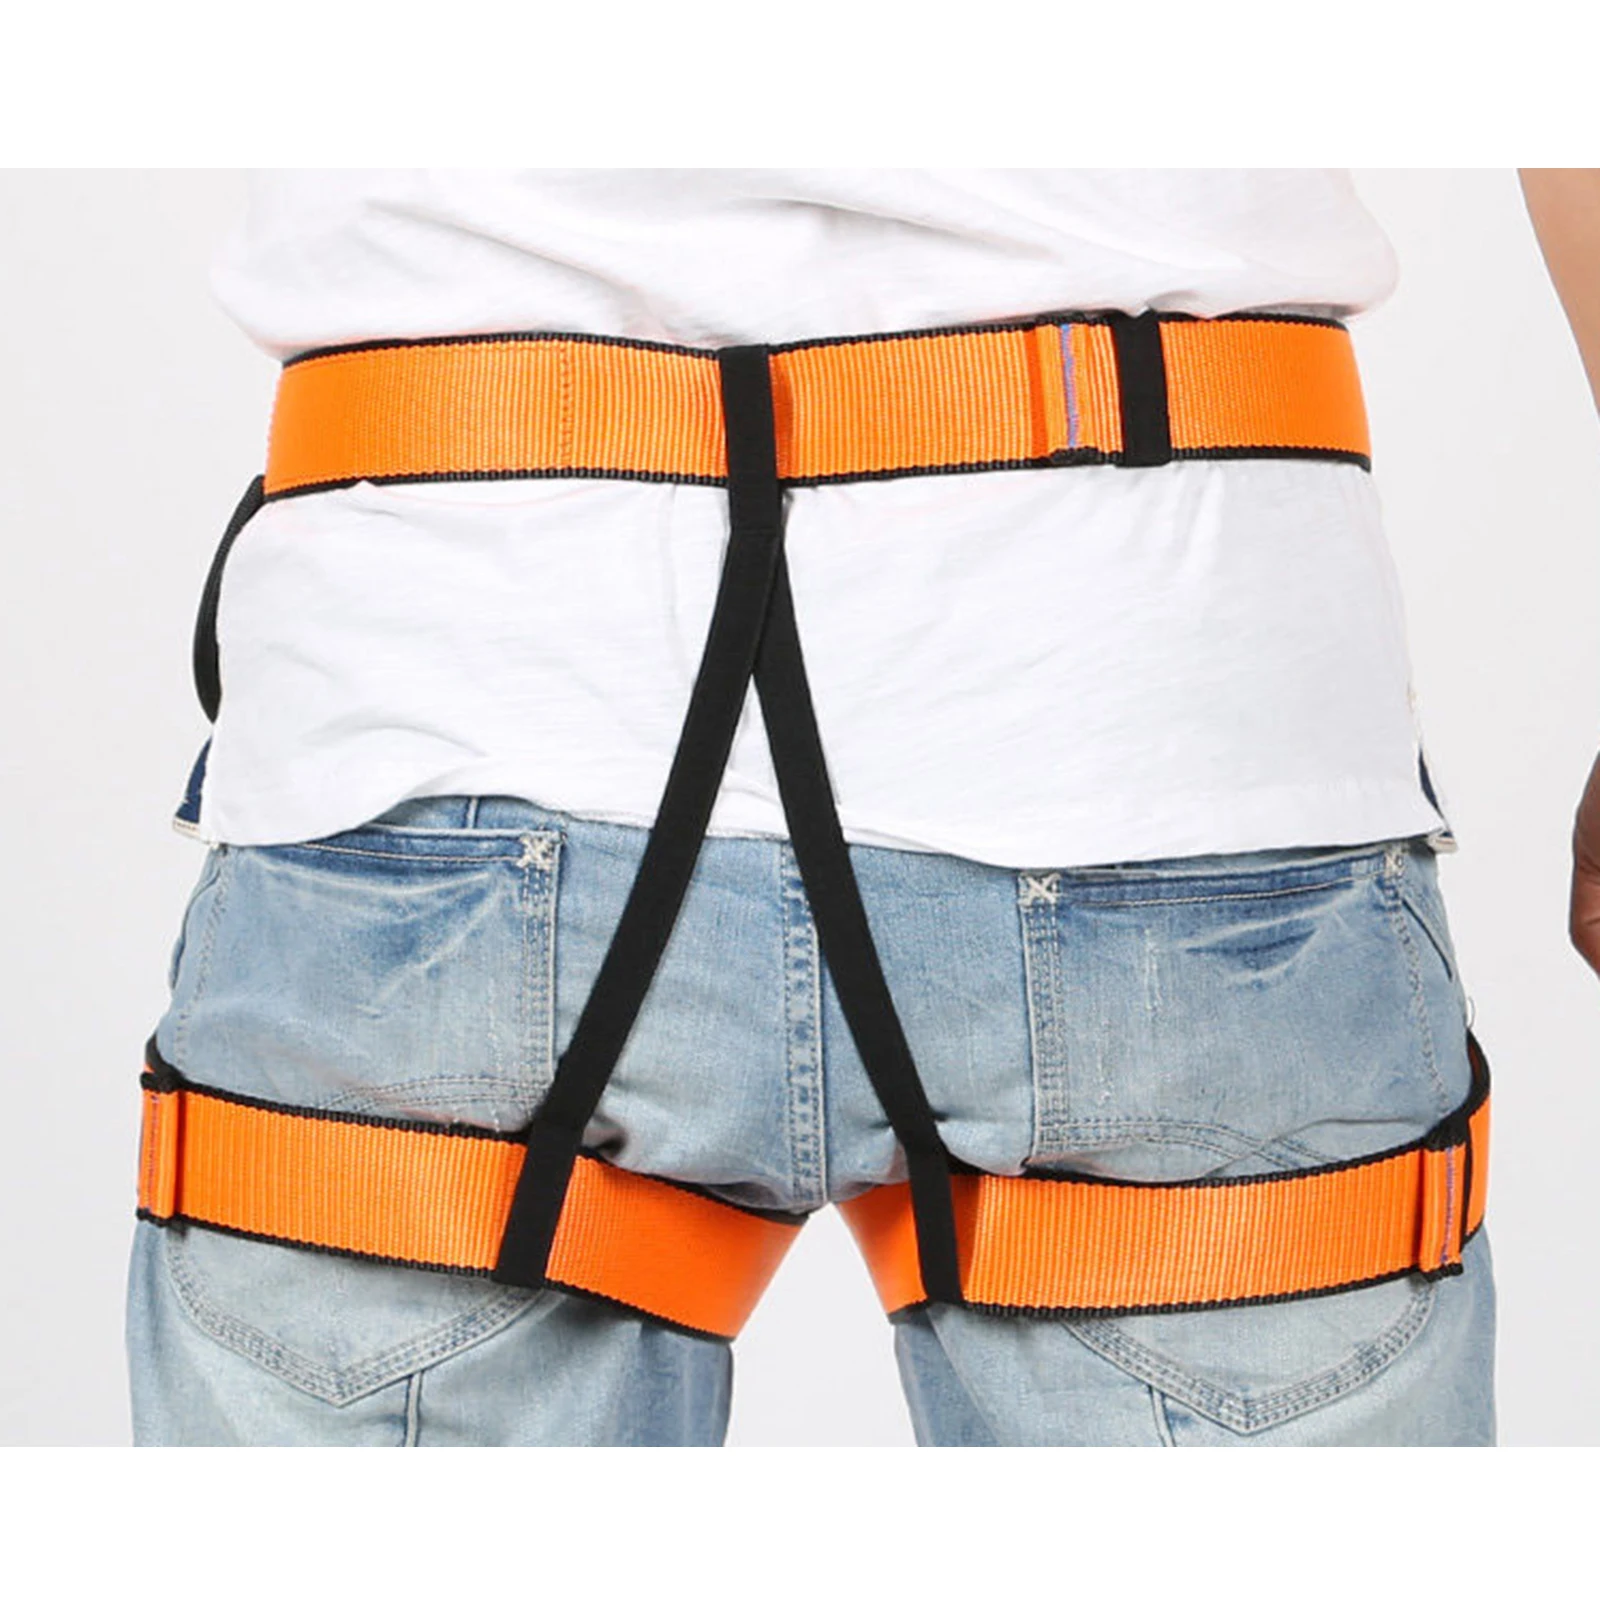 Climbing Harness 300kg Half Body Safety Belt Rescuing Survival Accessories